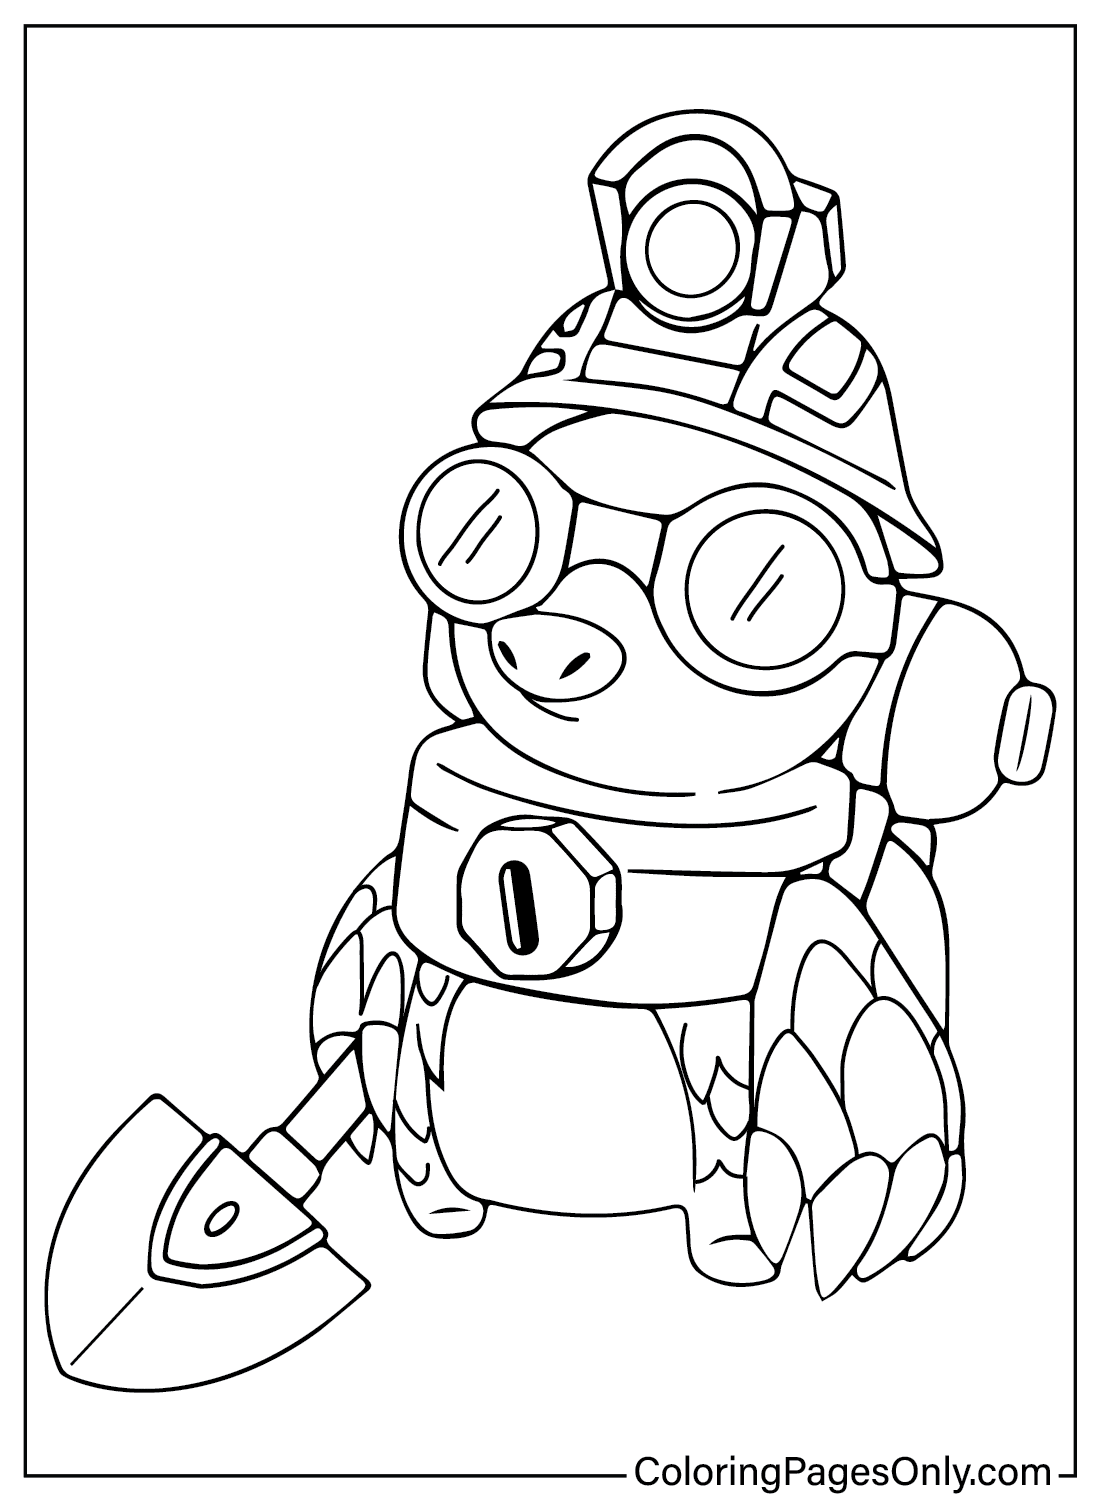 Molediver Teamfight Tactics Coloring Page from Teamfight Tactics